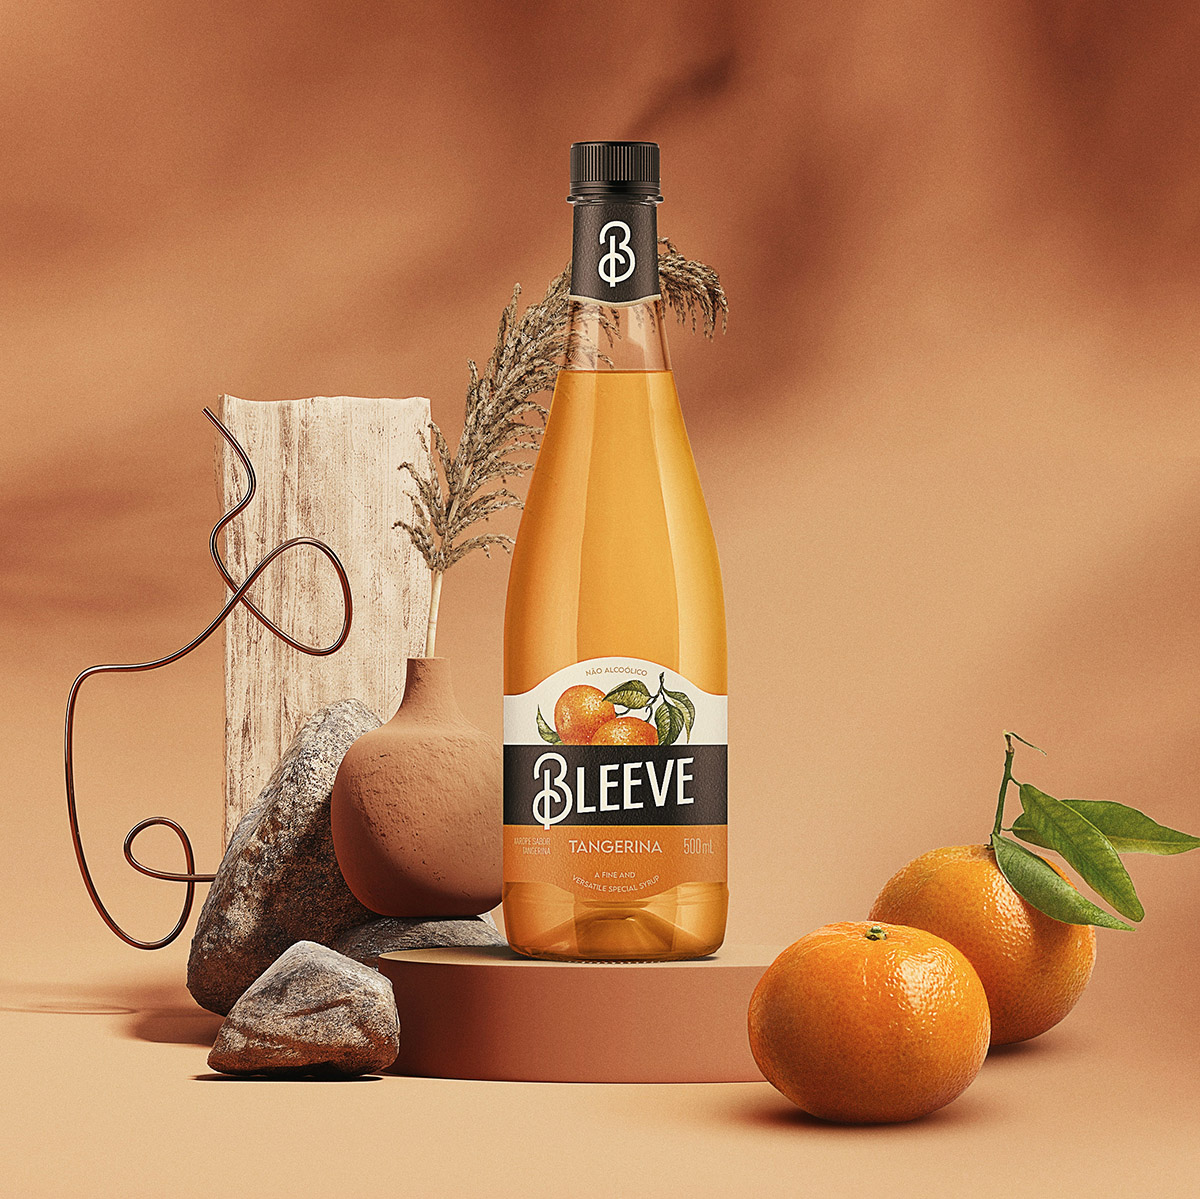 Bleeve Syrups Branding and Packaging Design by vbiasi